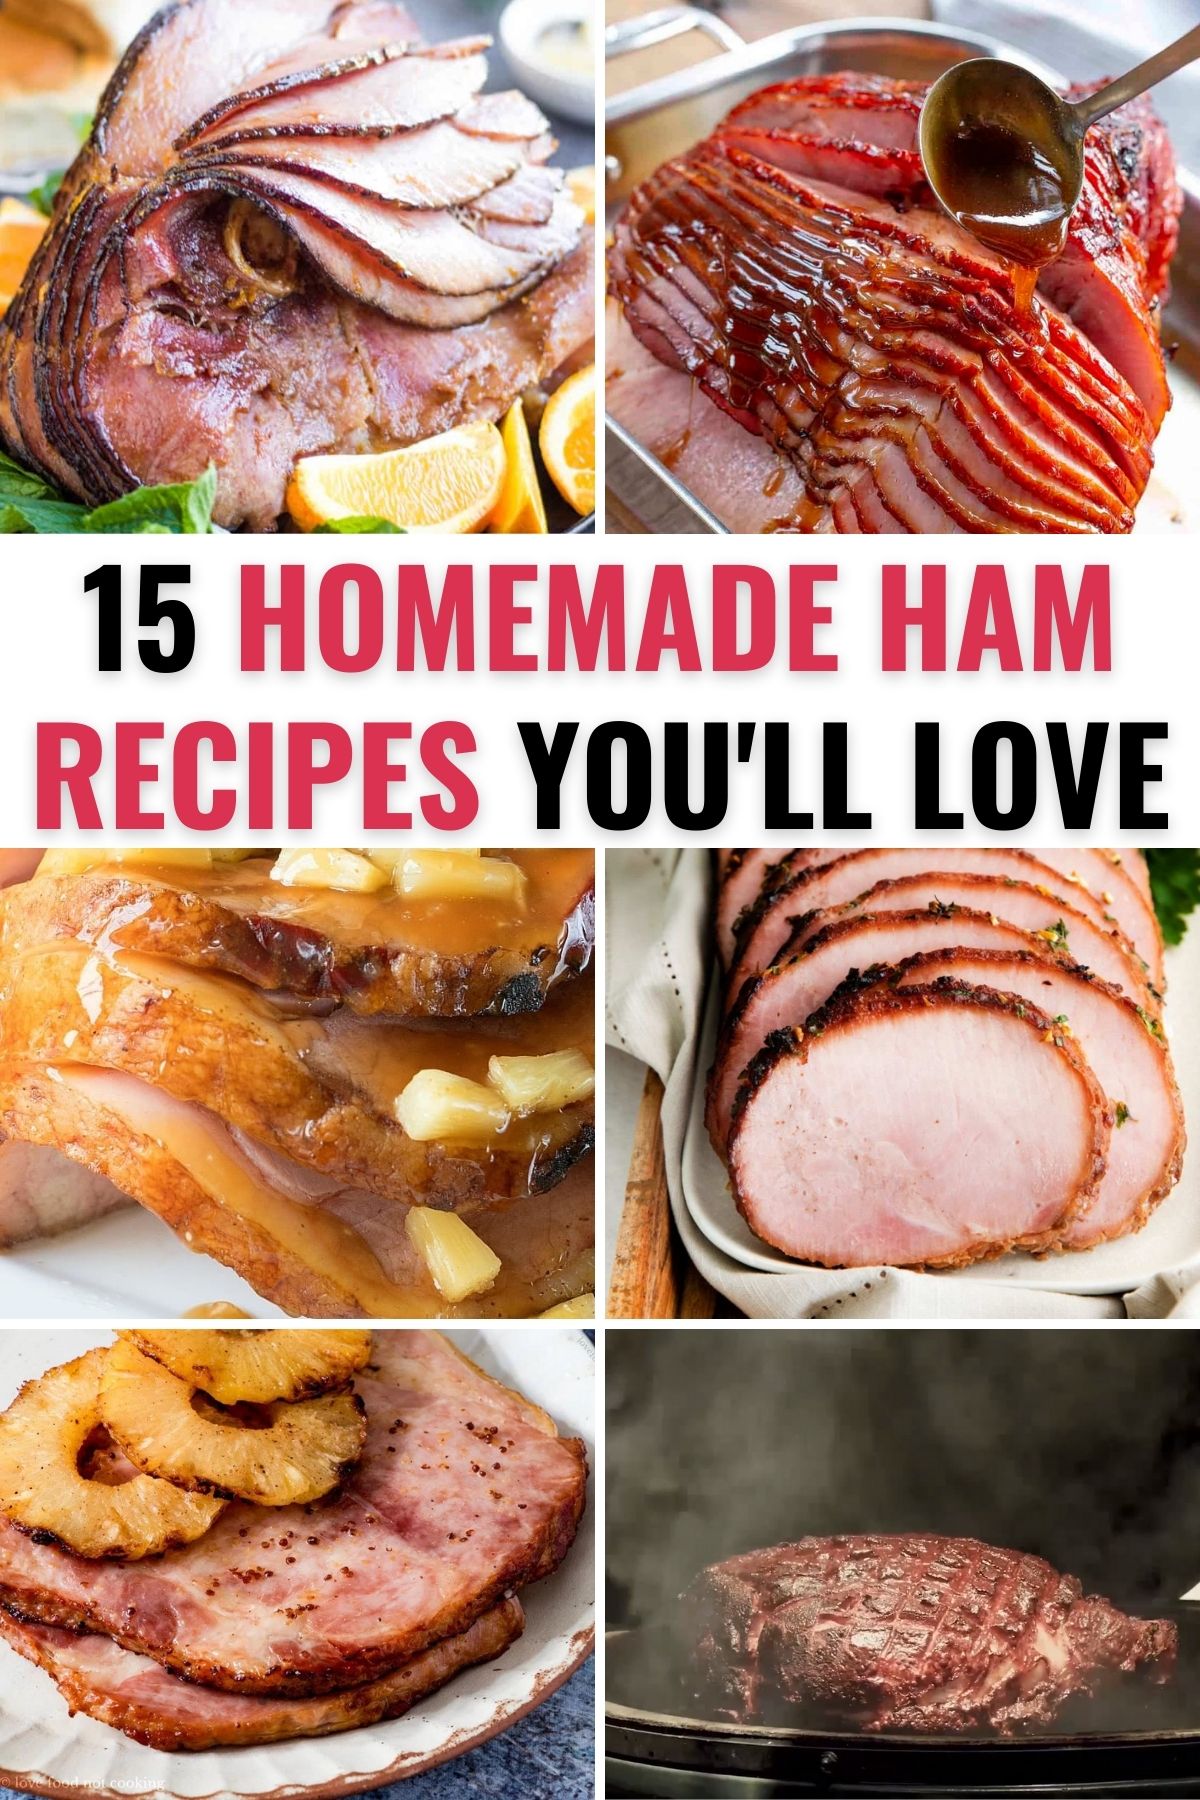 A collection of homemade ham